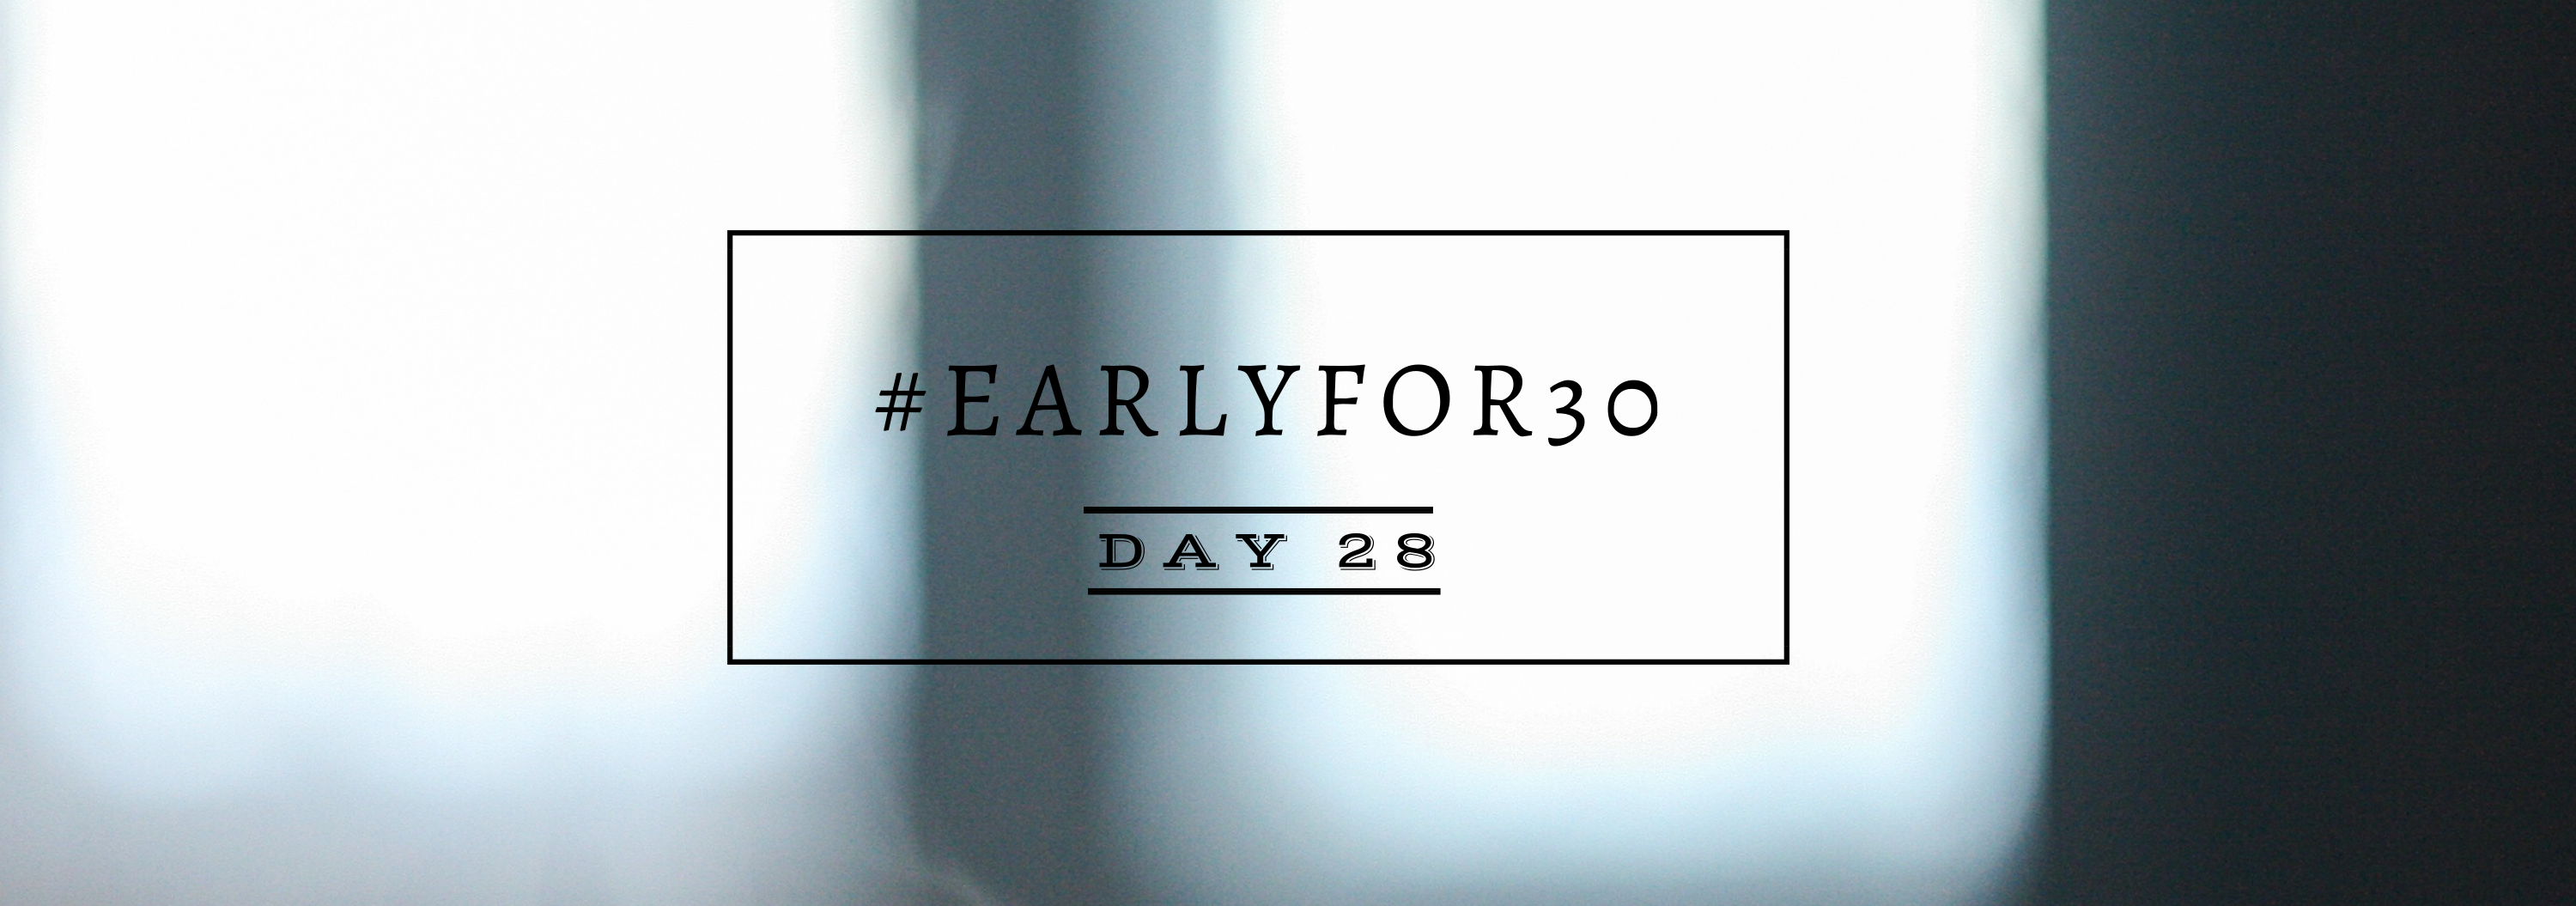 #Earlyfor30 – Day 28